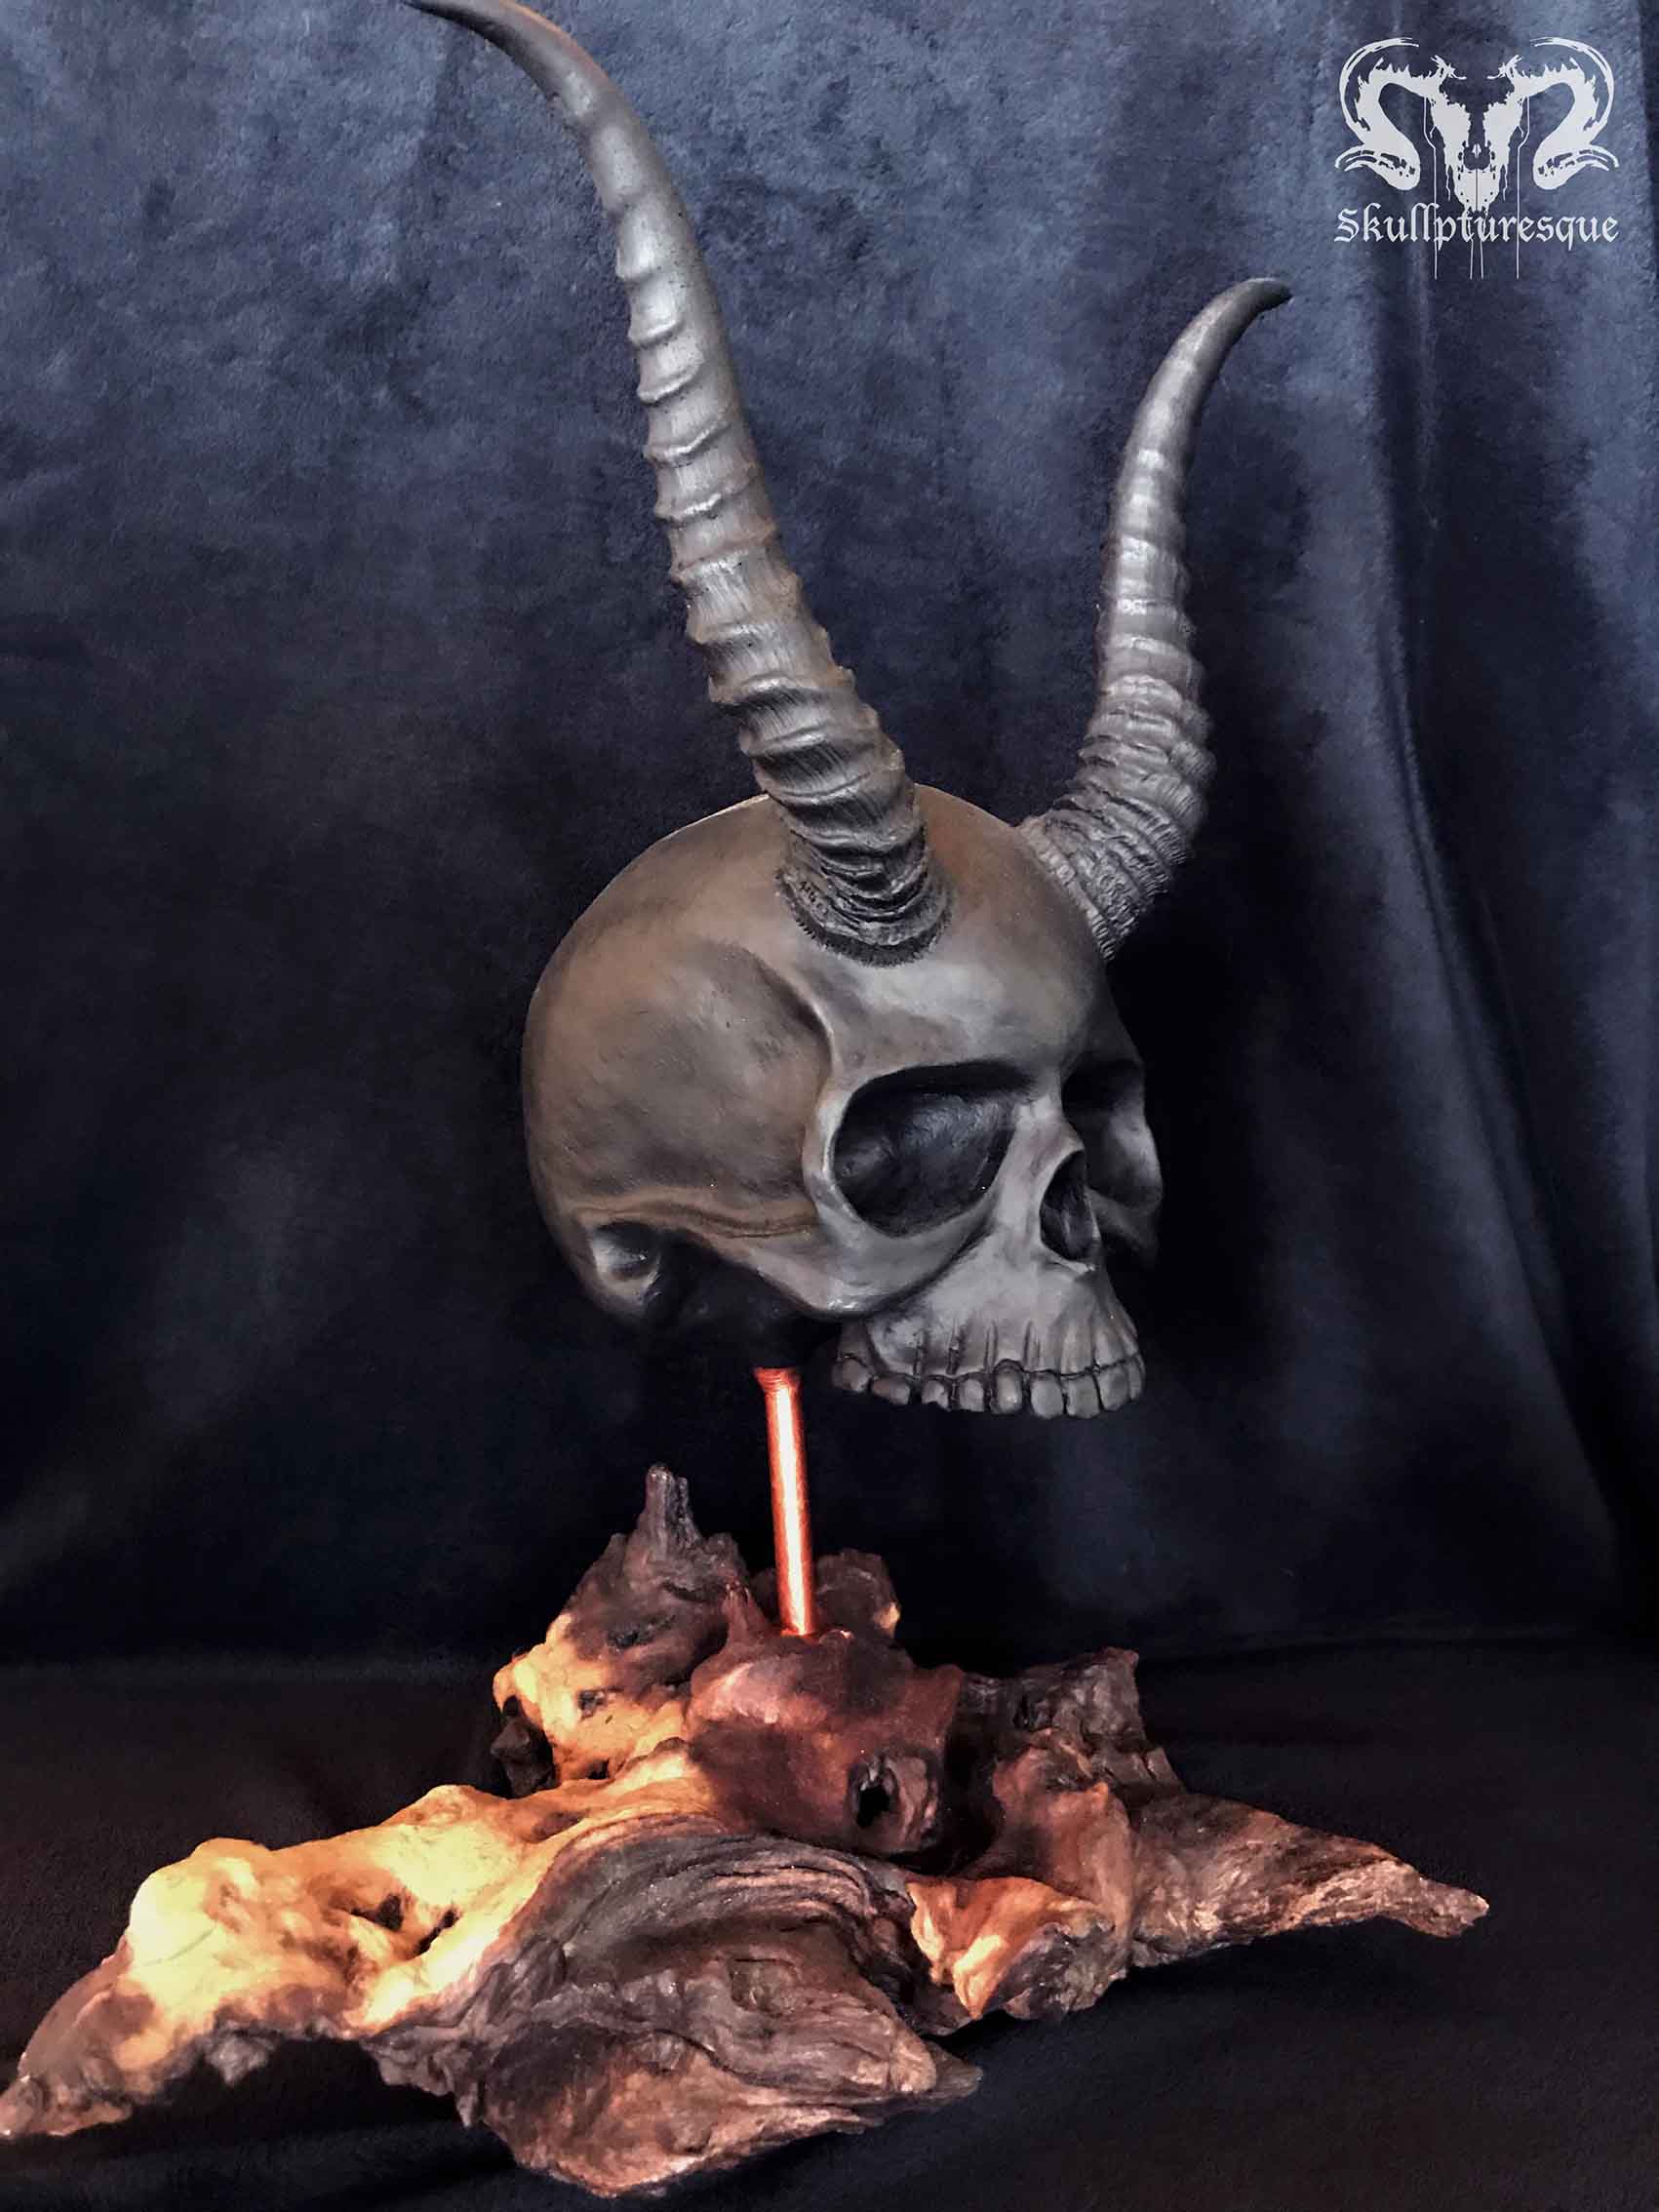 human skull with horns